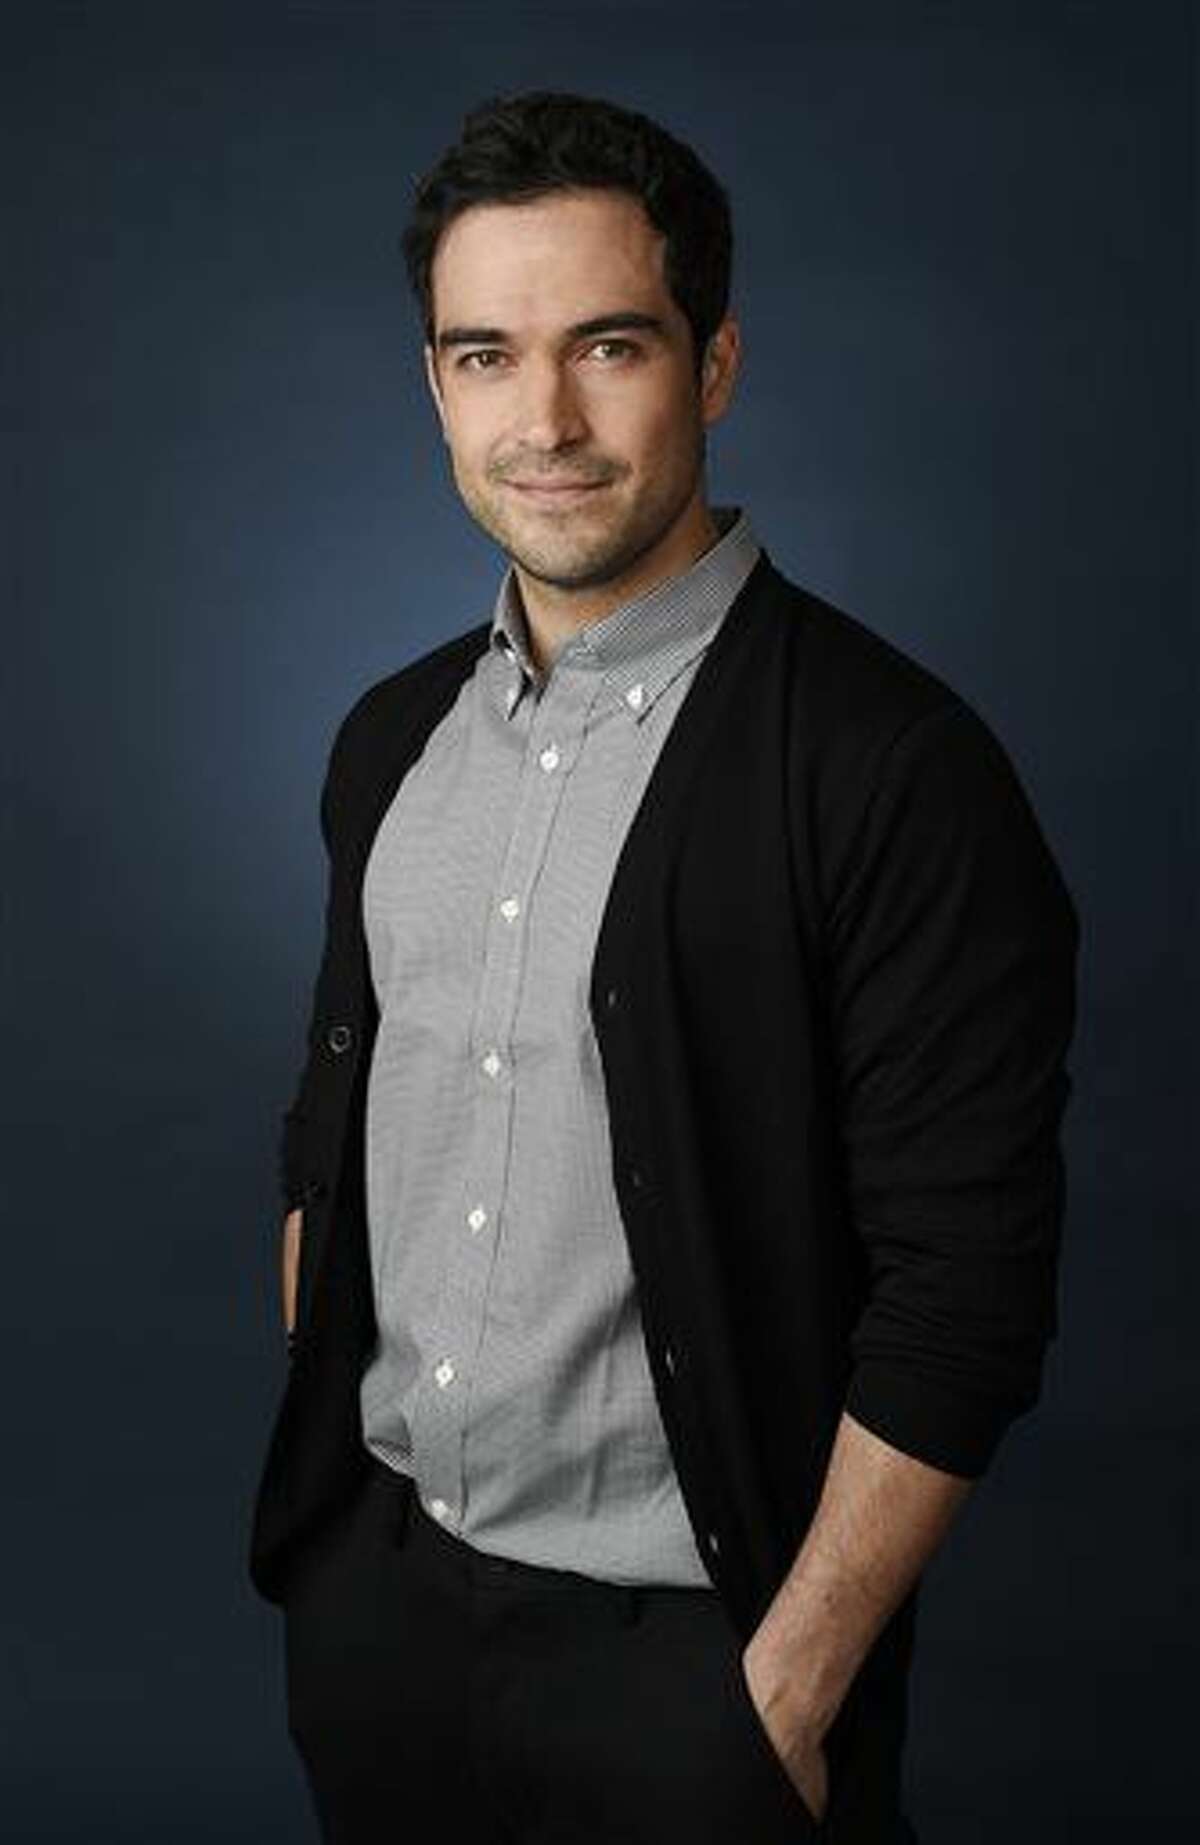 Alfonso Herrera, a cast member in the FOX series "The Exorcist," poses for a portrait during the 2016 Television Critics Association Summer Press Tour at the Beverly Hilton on Monday, Aug. 8, 2016, in Beverly Hills, Calif. (Photo by Chris Pizzello/Invision/AP)